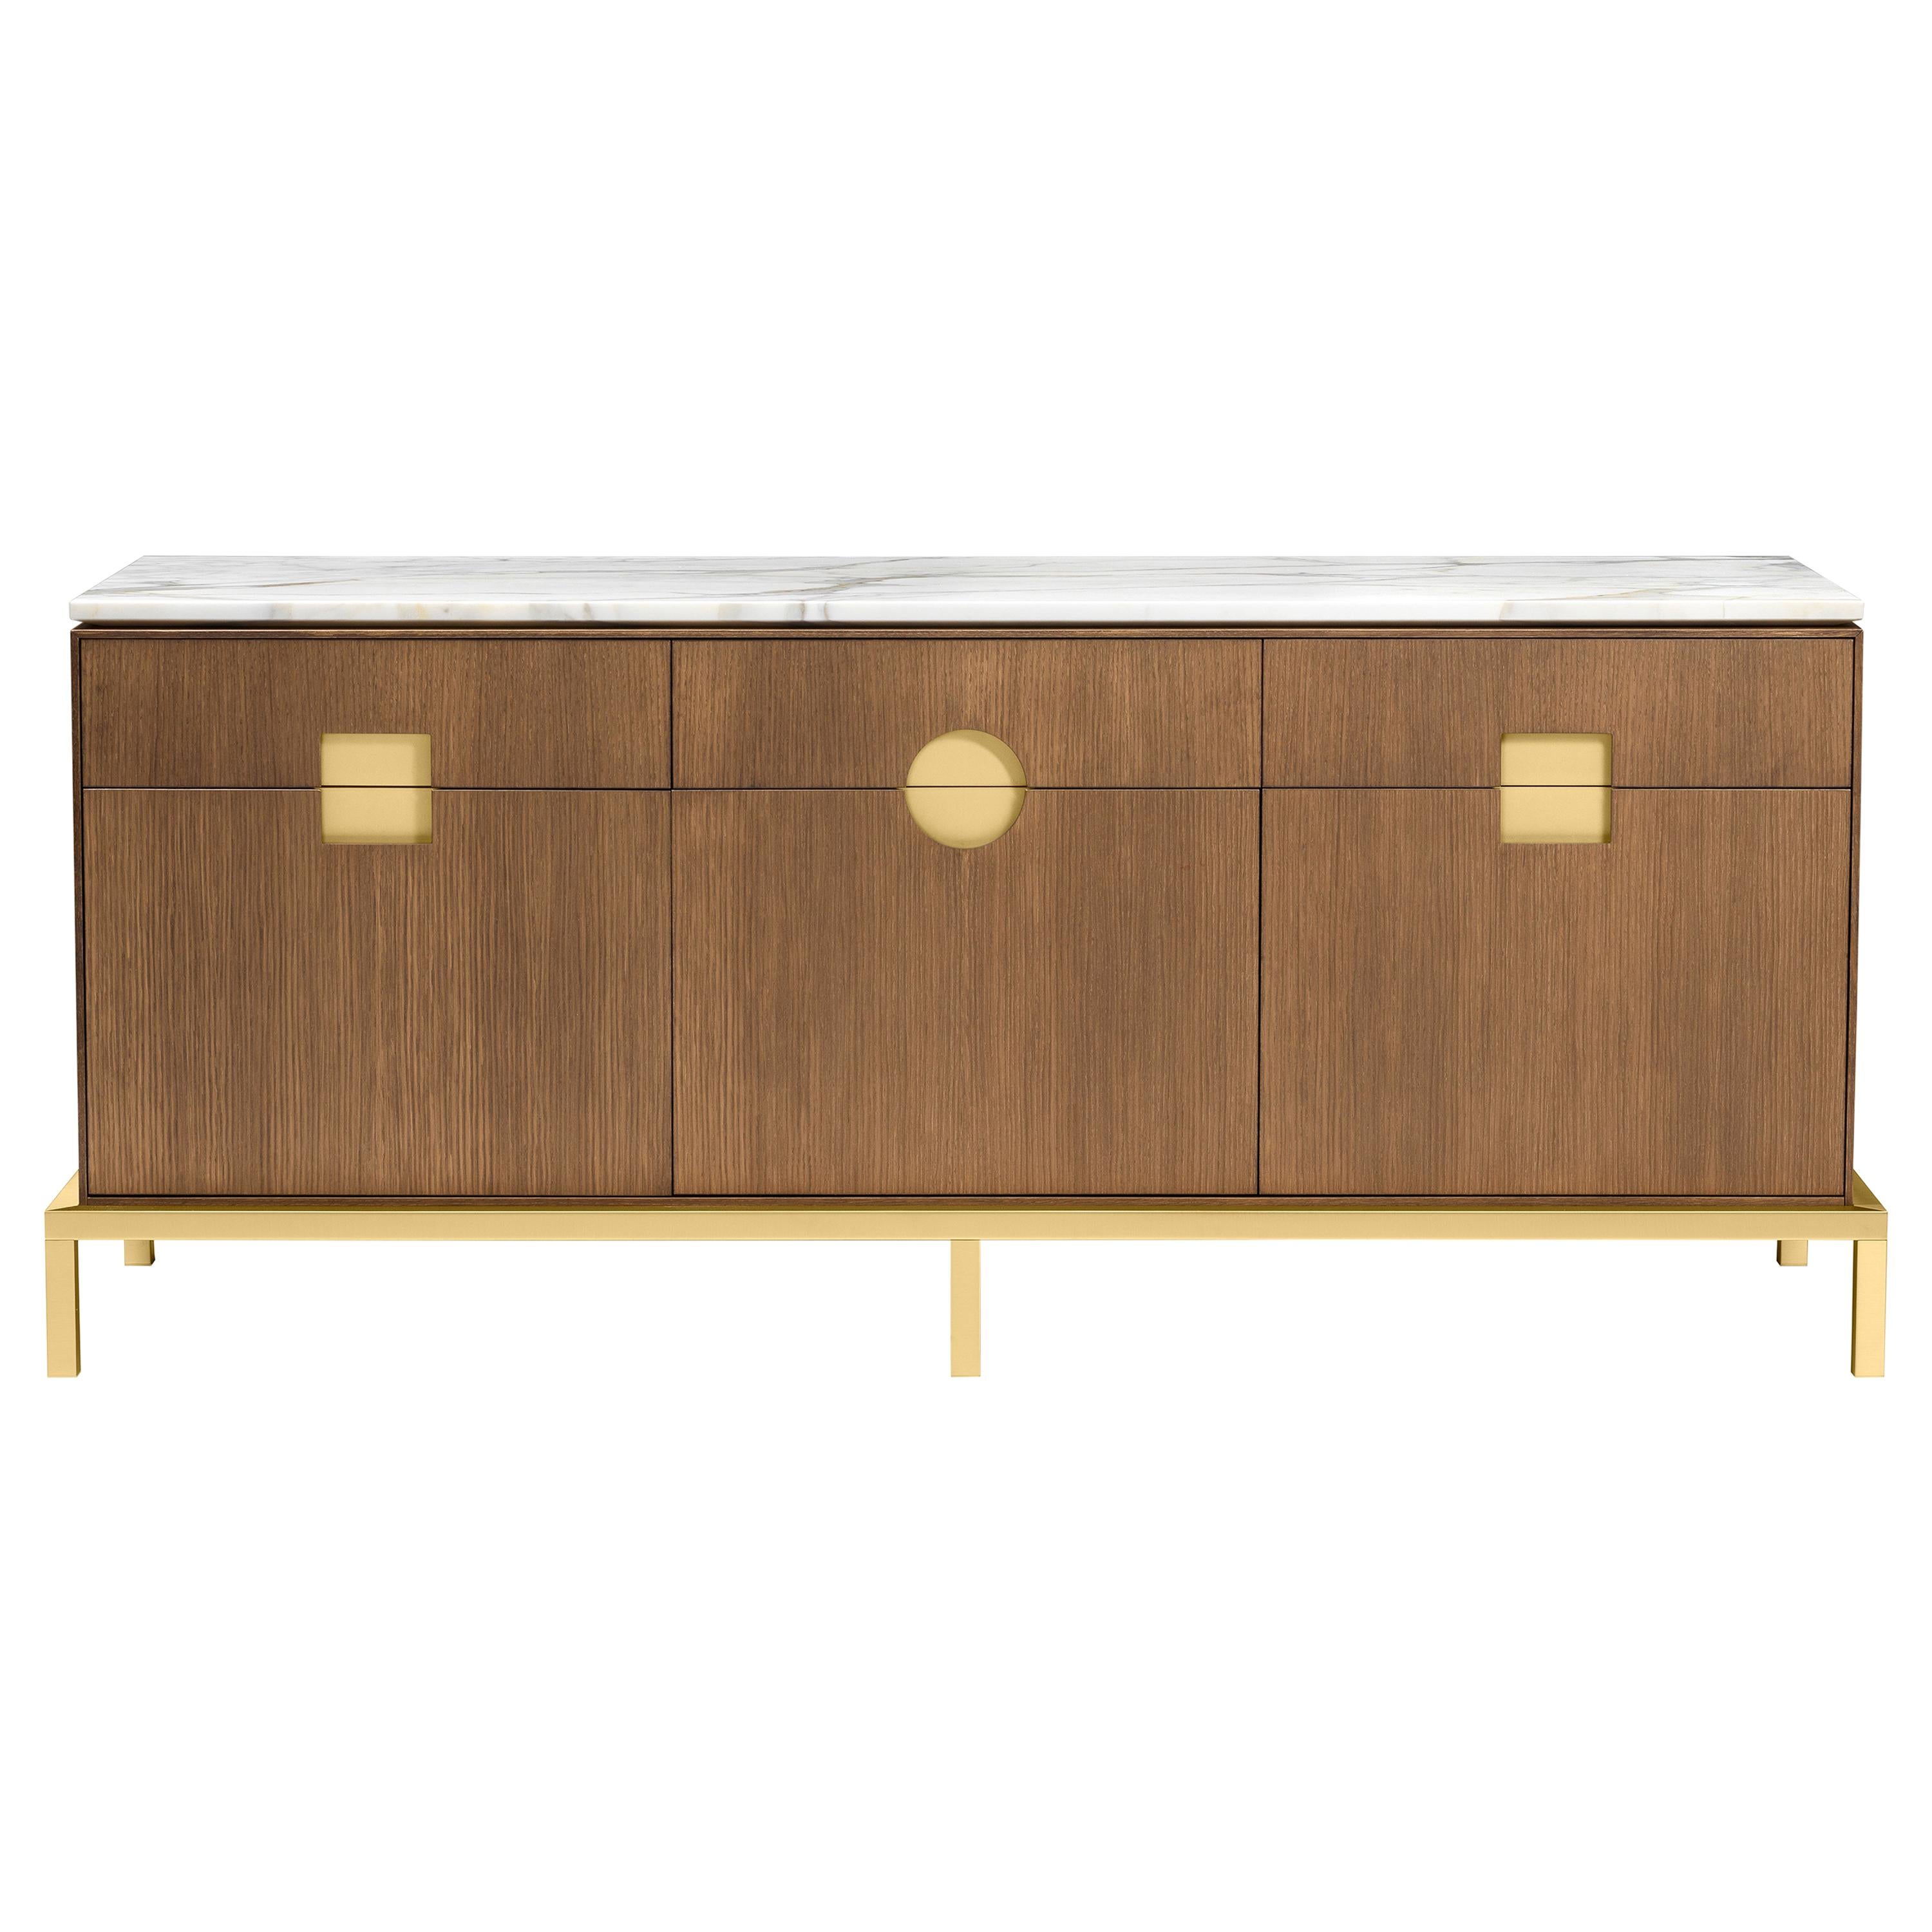 Zuan Dining Cabinet with Satin Brass Legs & Calacatta Marble by Paolo Rizzatto For Sale